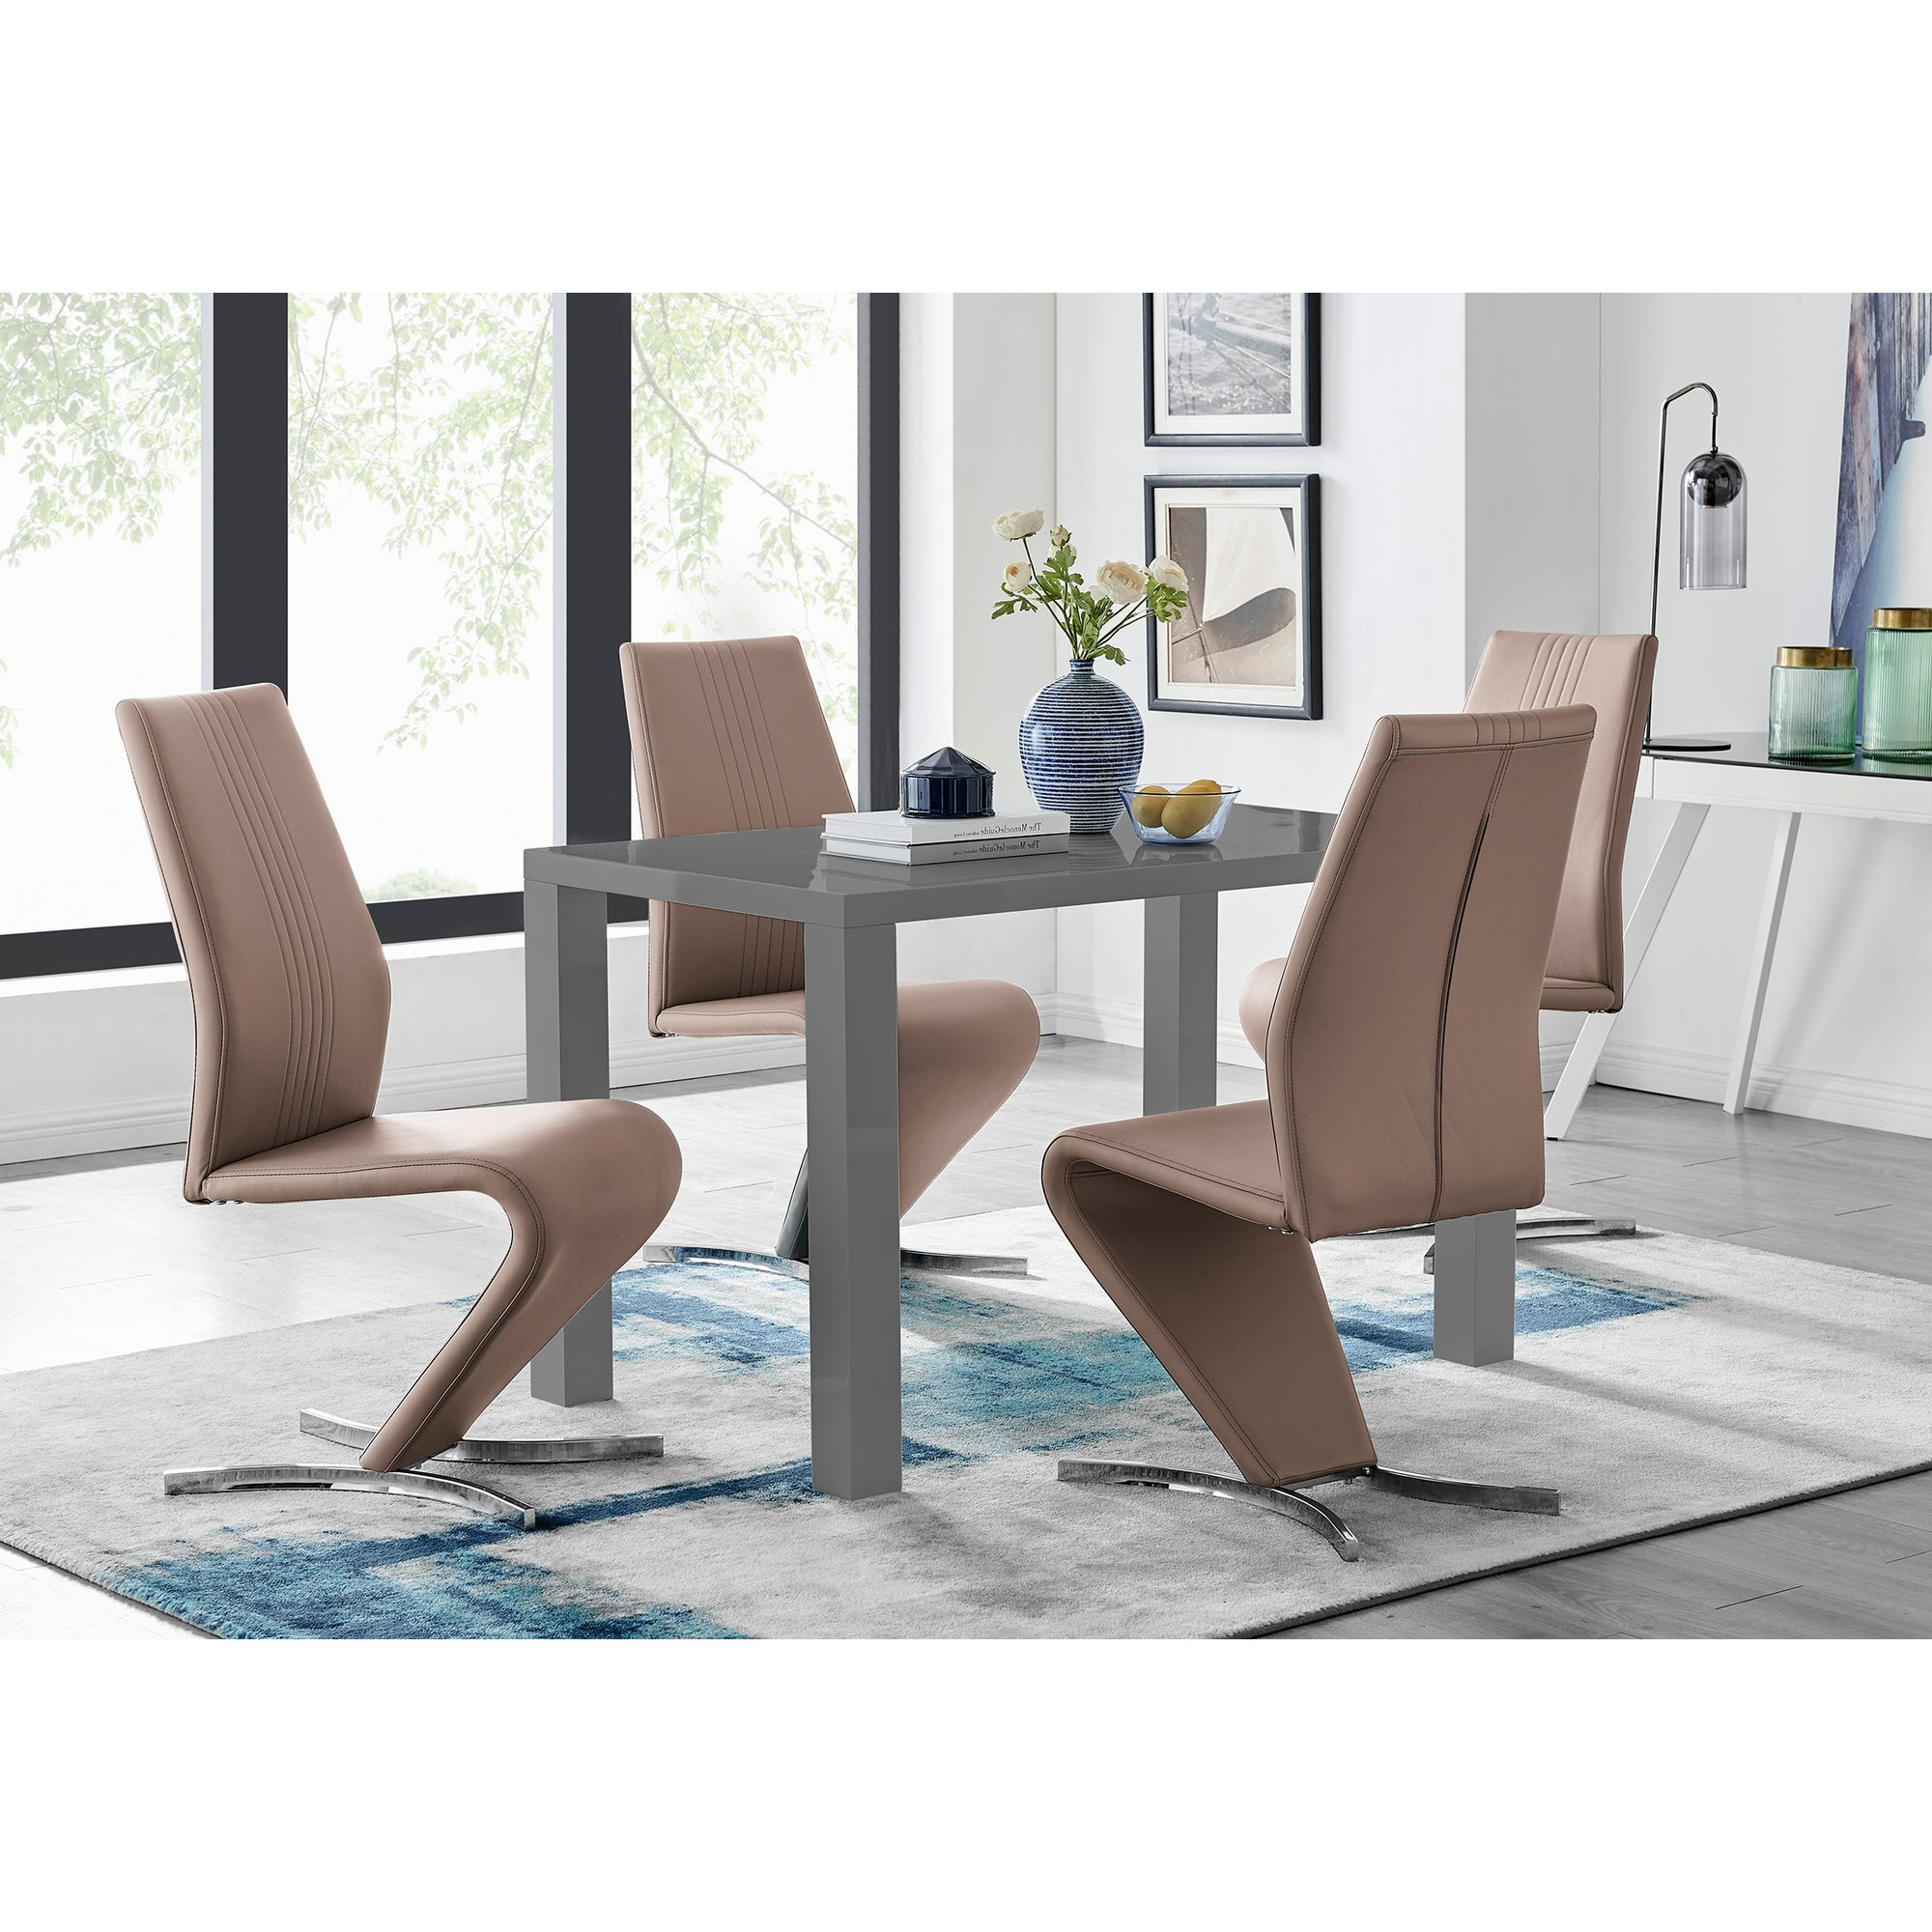 Pivero Grey High Gloss Dining Table and 4 Luxury Willow Chairs Set